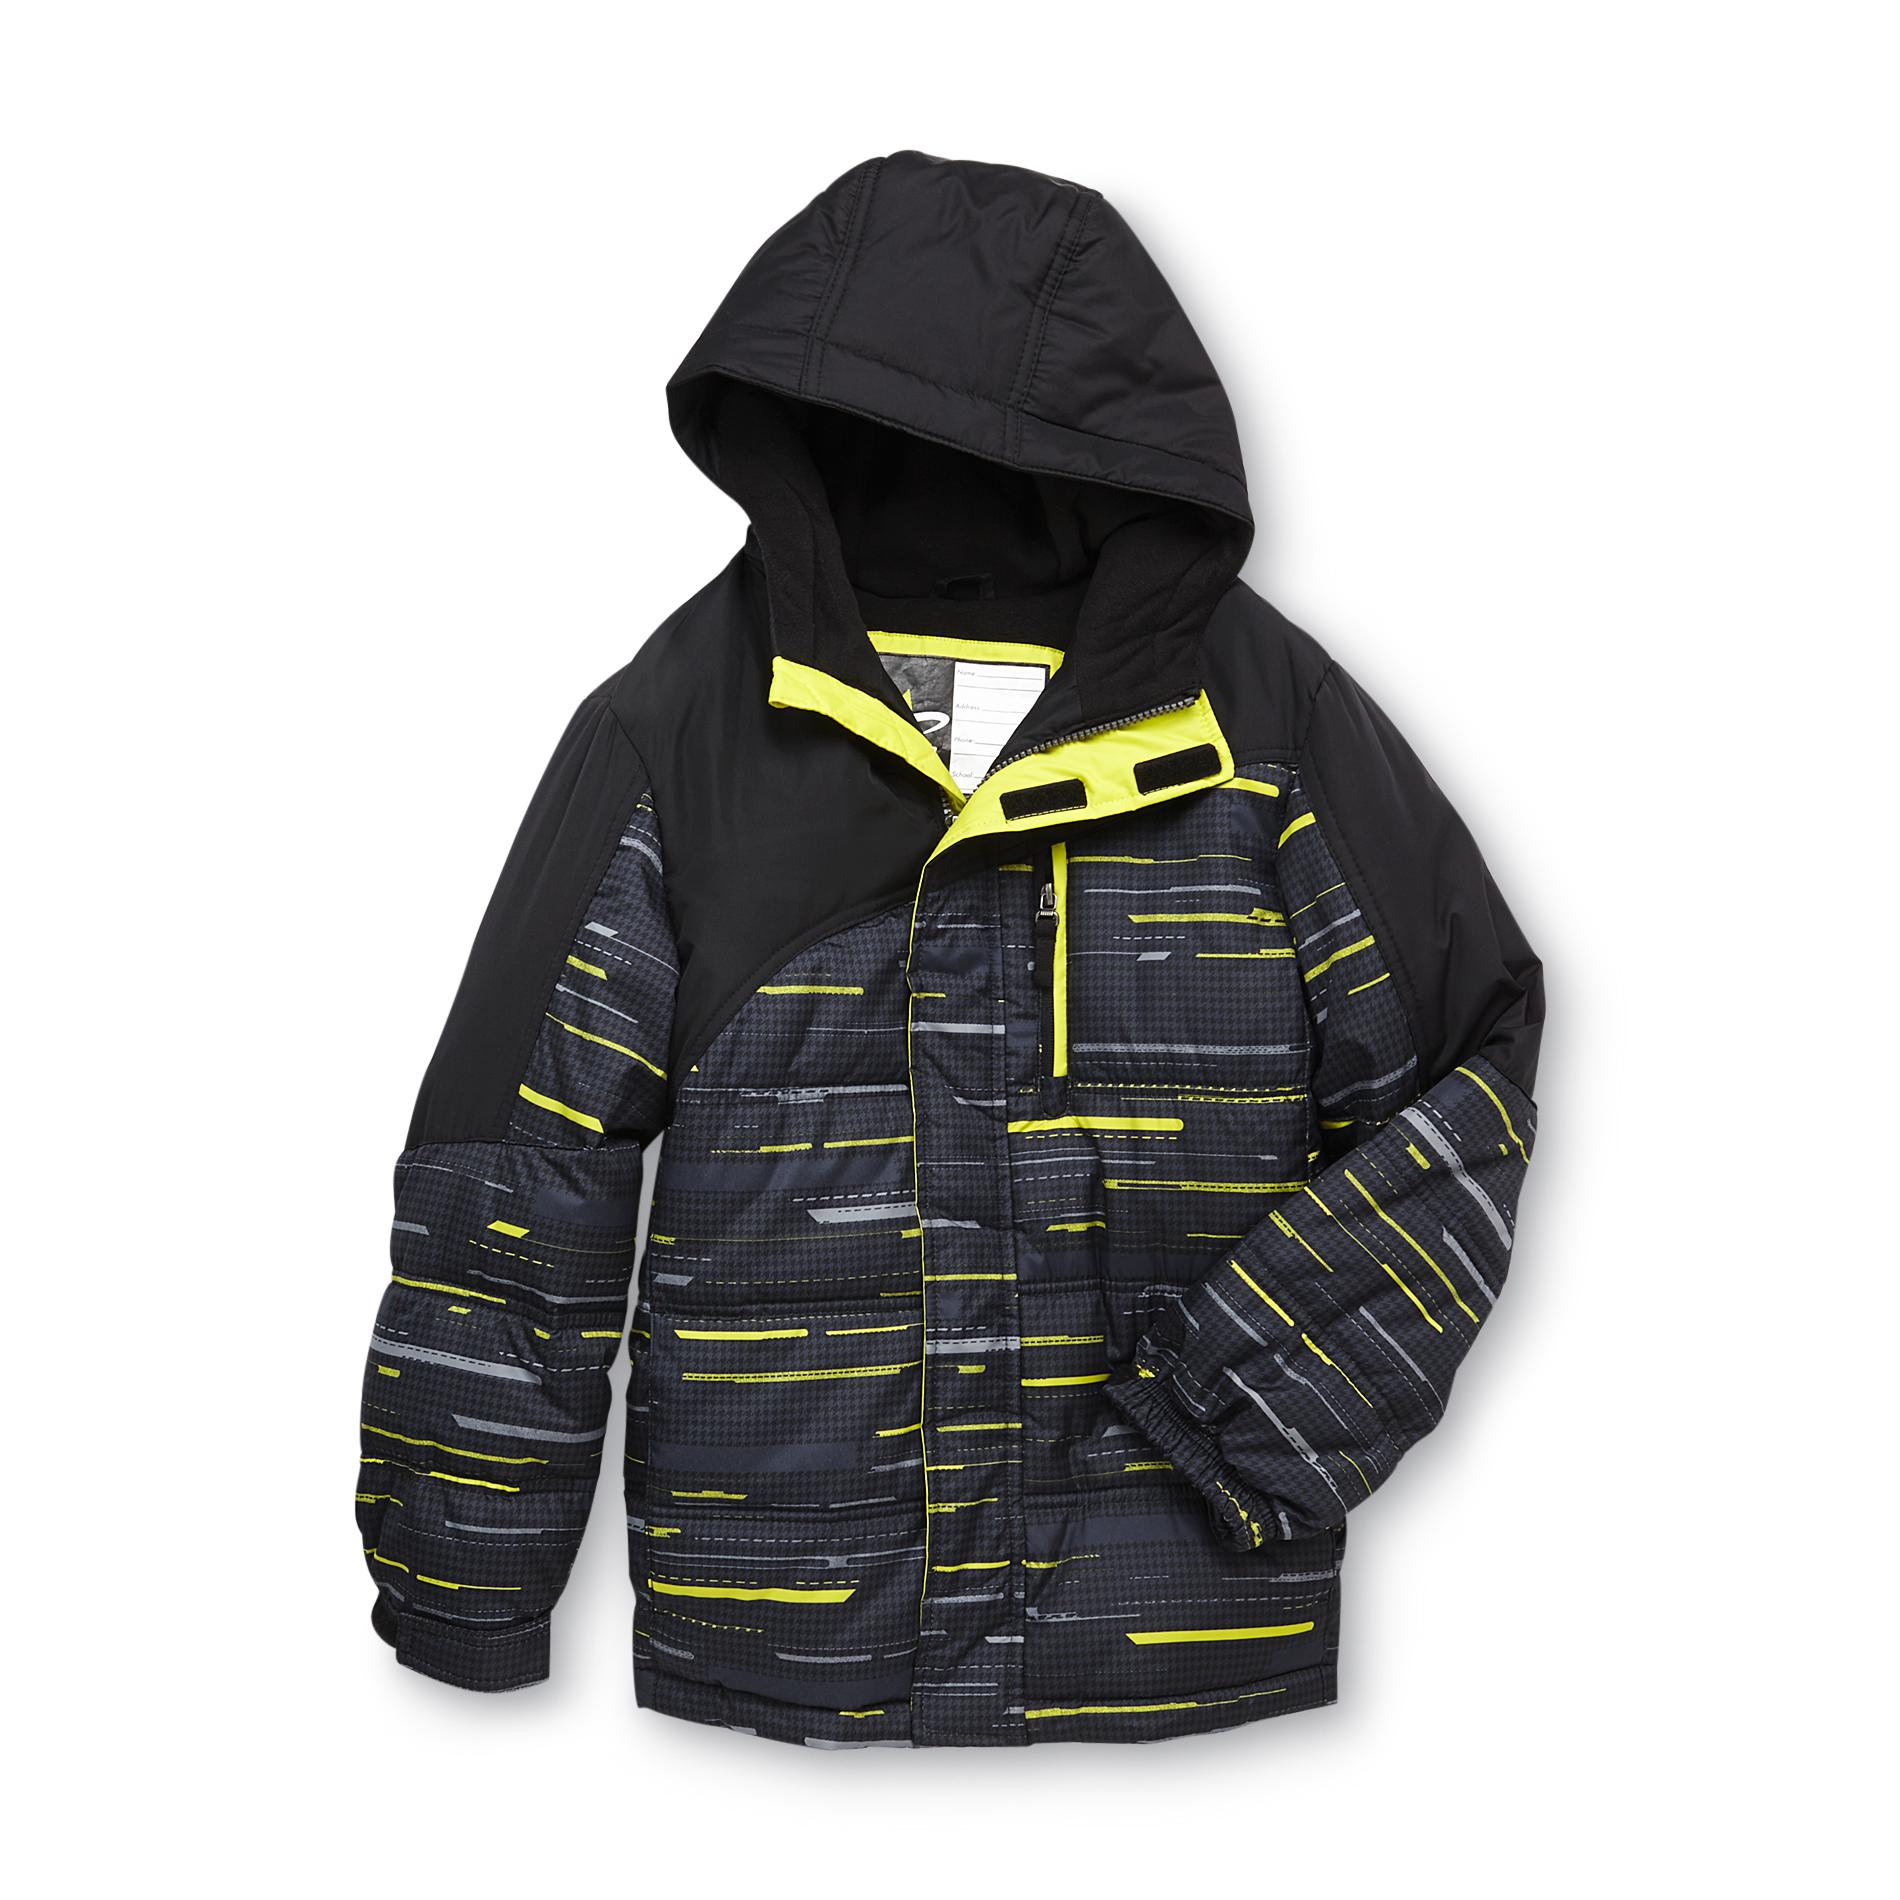 Athletech Boy's Hooded Performance Jacket - Abstract Stripes